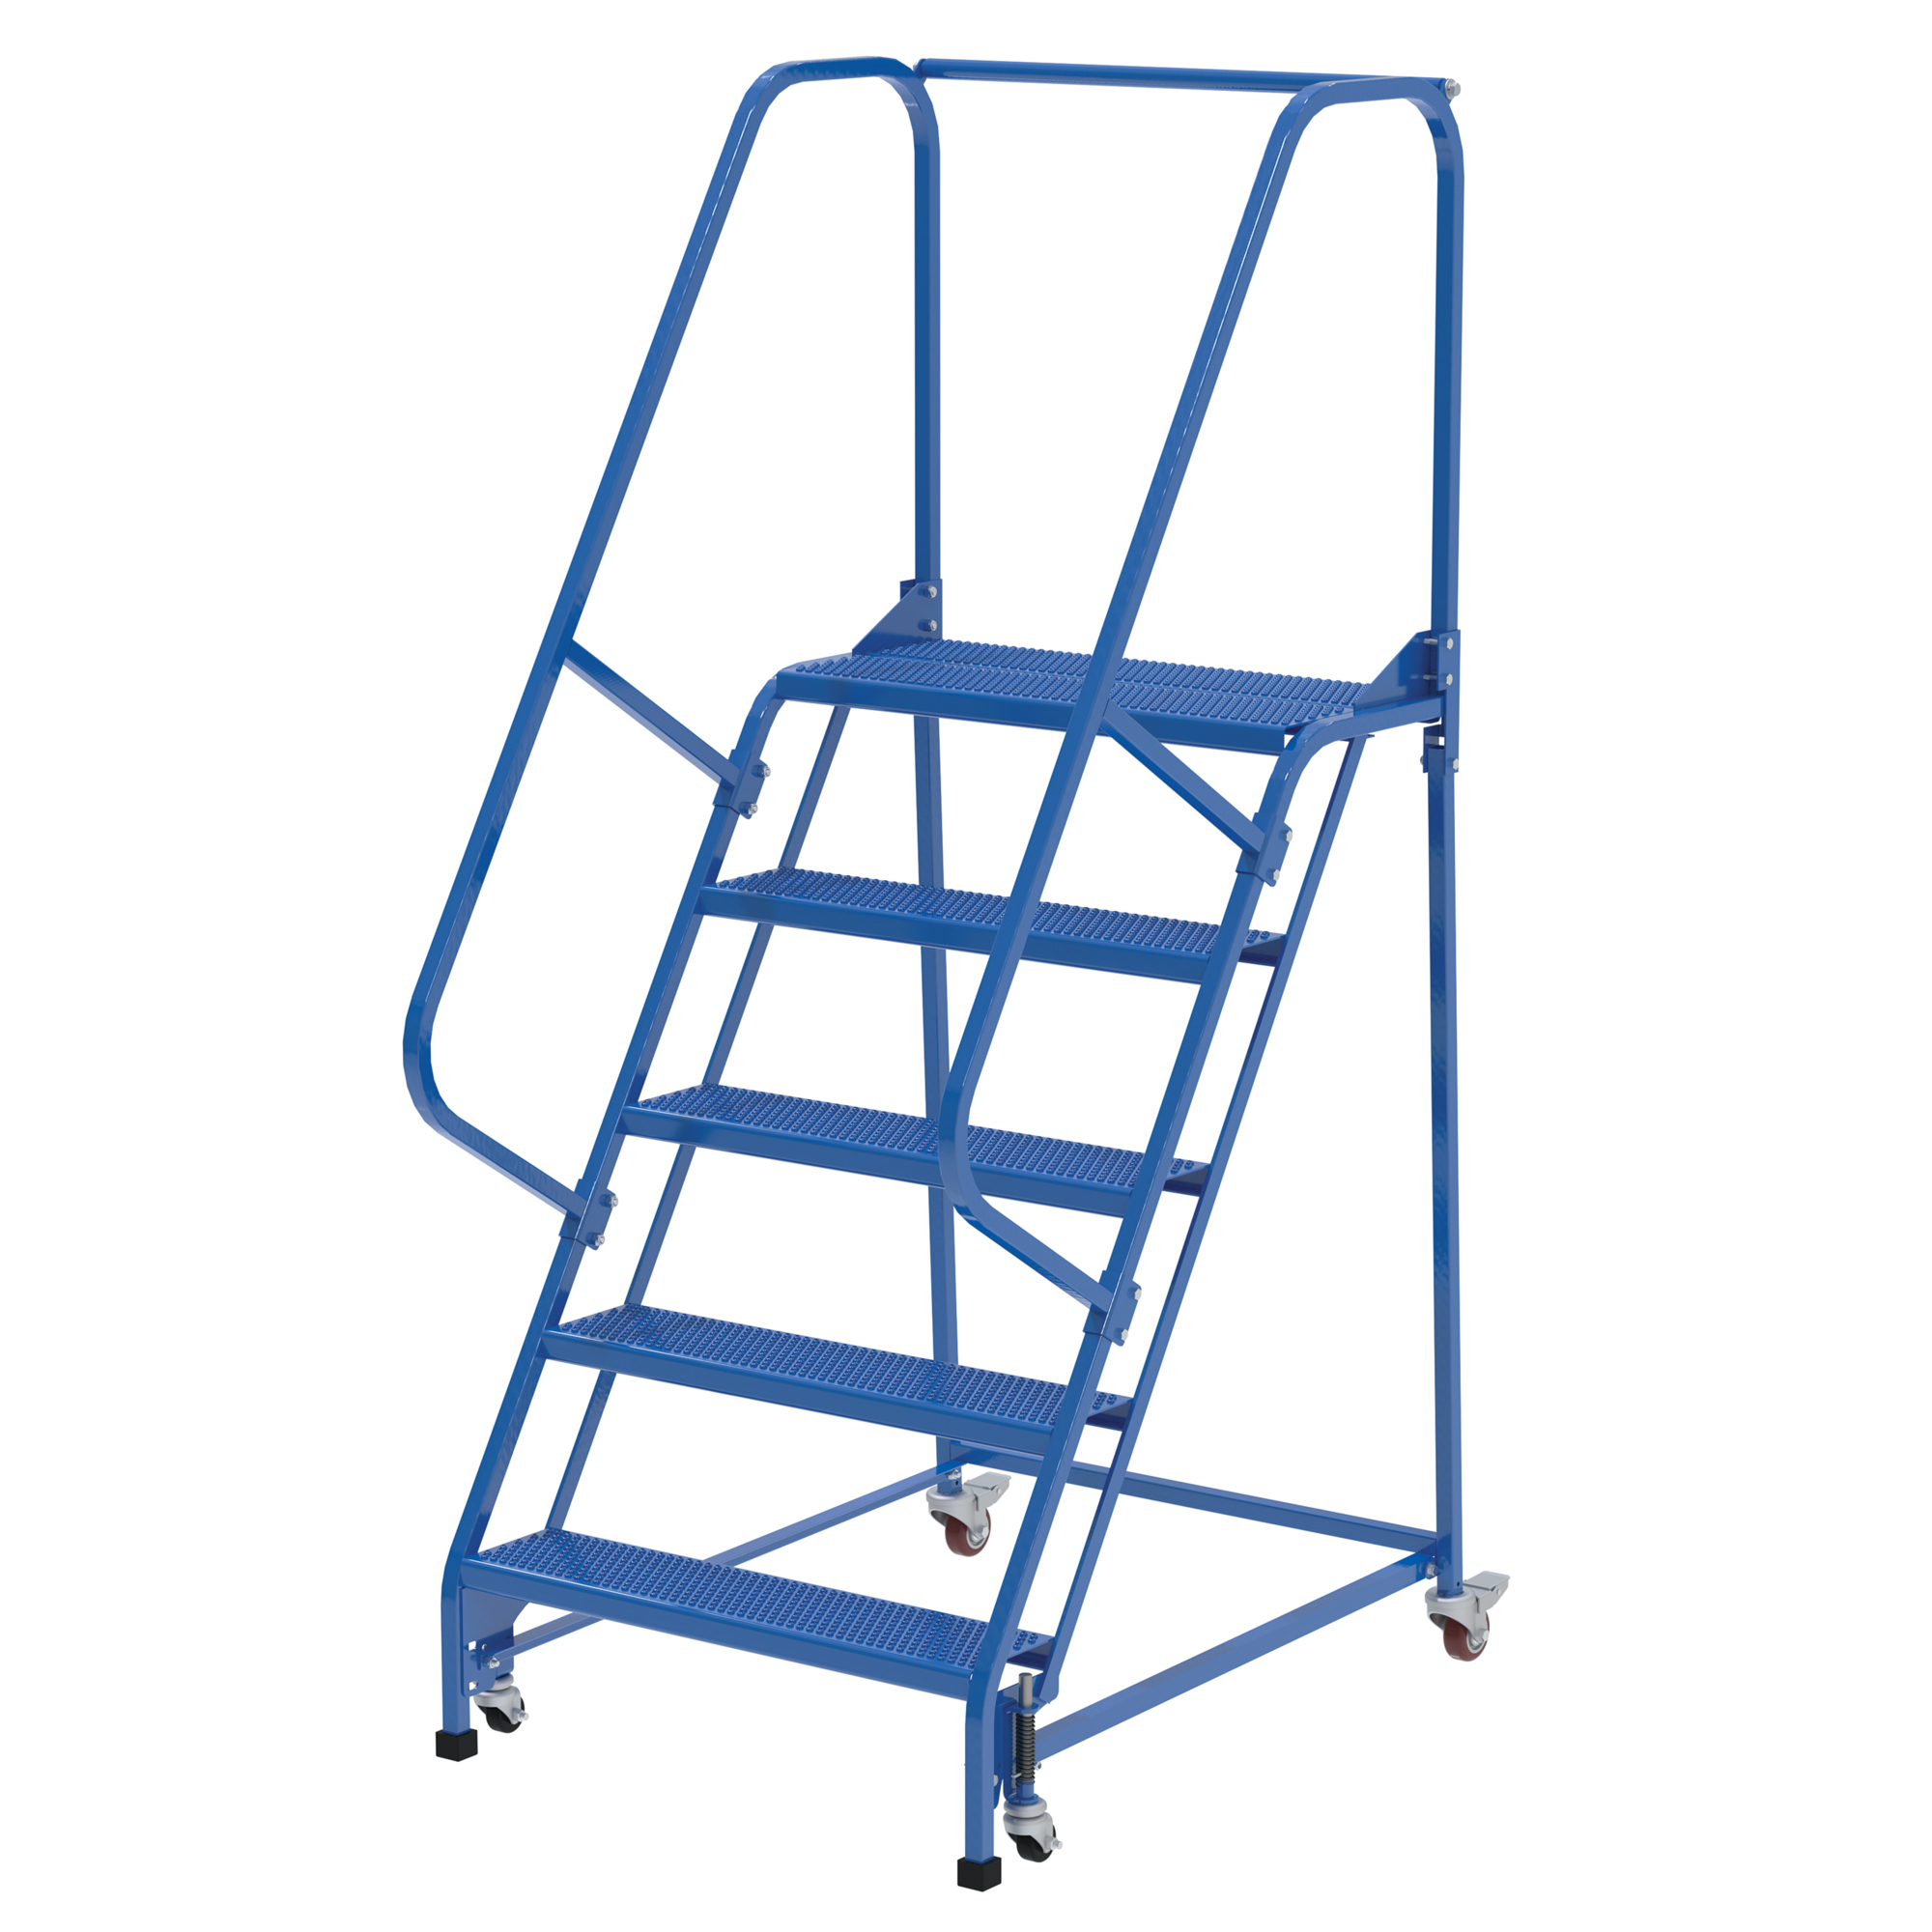 Vestil, 5 Step perforated warehouse ladder, Overall Height 80 in, Steps 5 Material Steel, Model LAD-PW-32-5-P